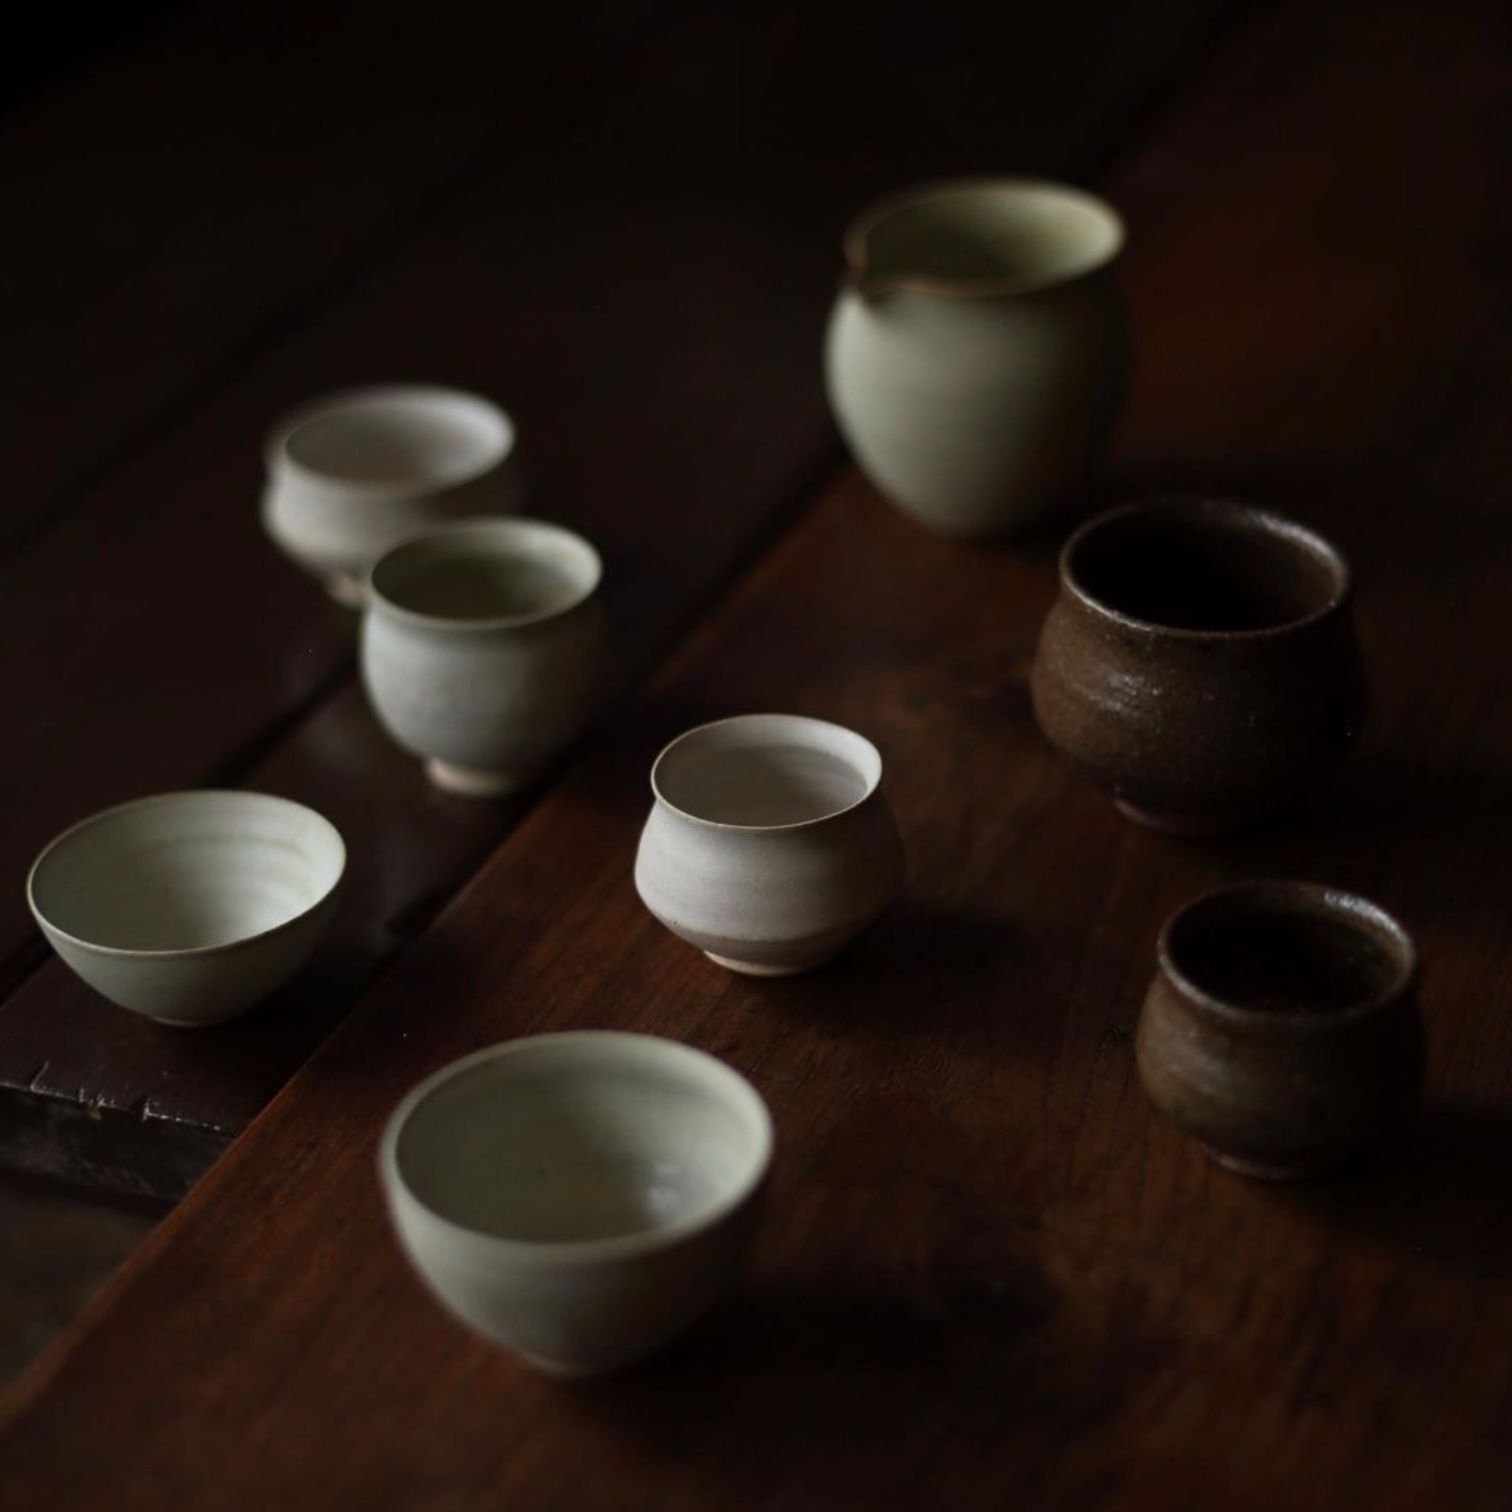 A Group Of Cups On A Table